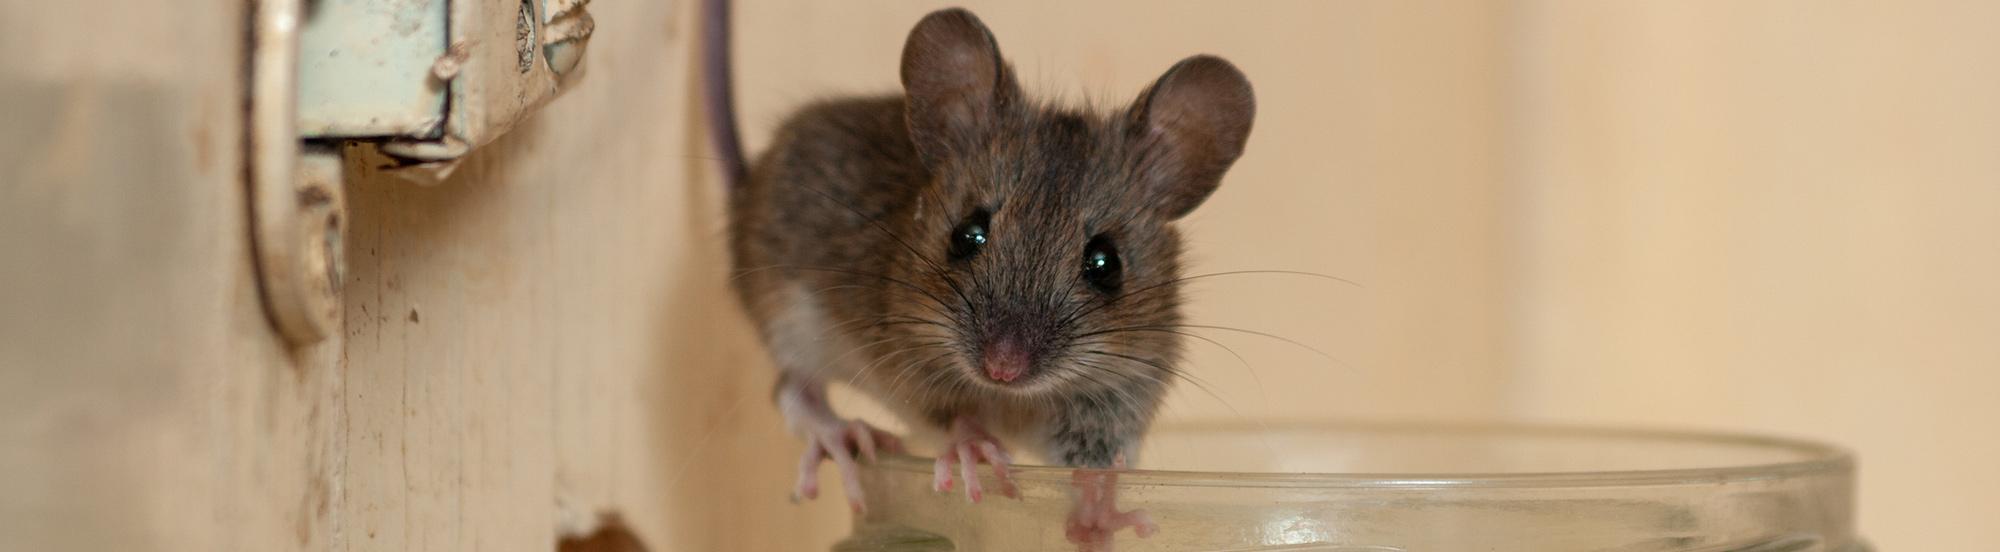 house mouse inside midwest home